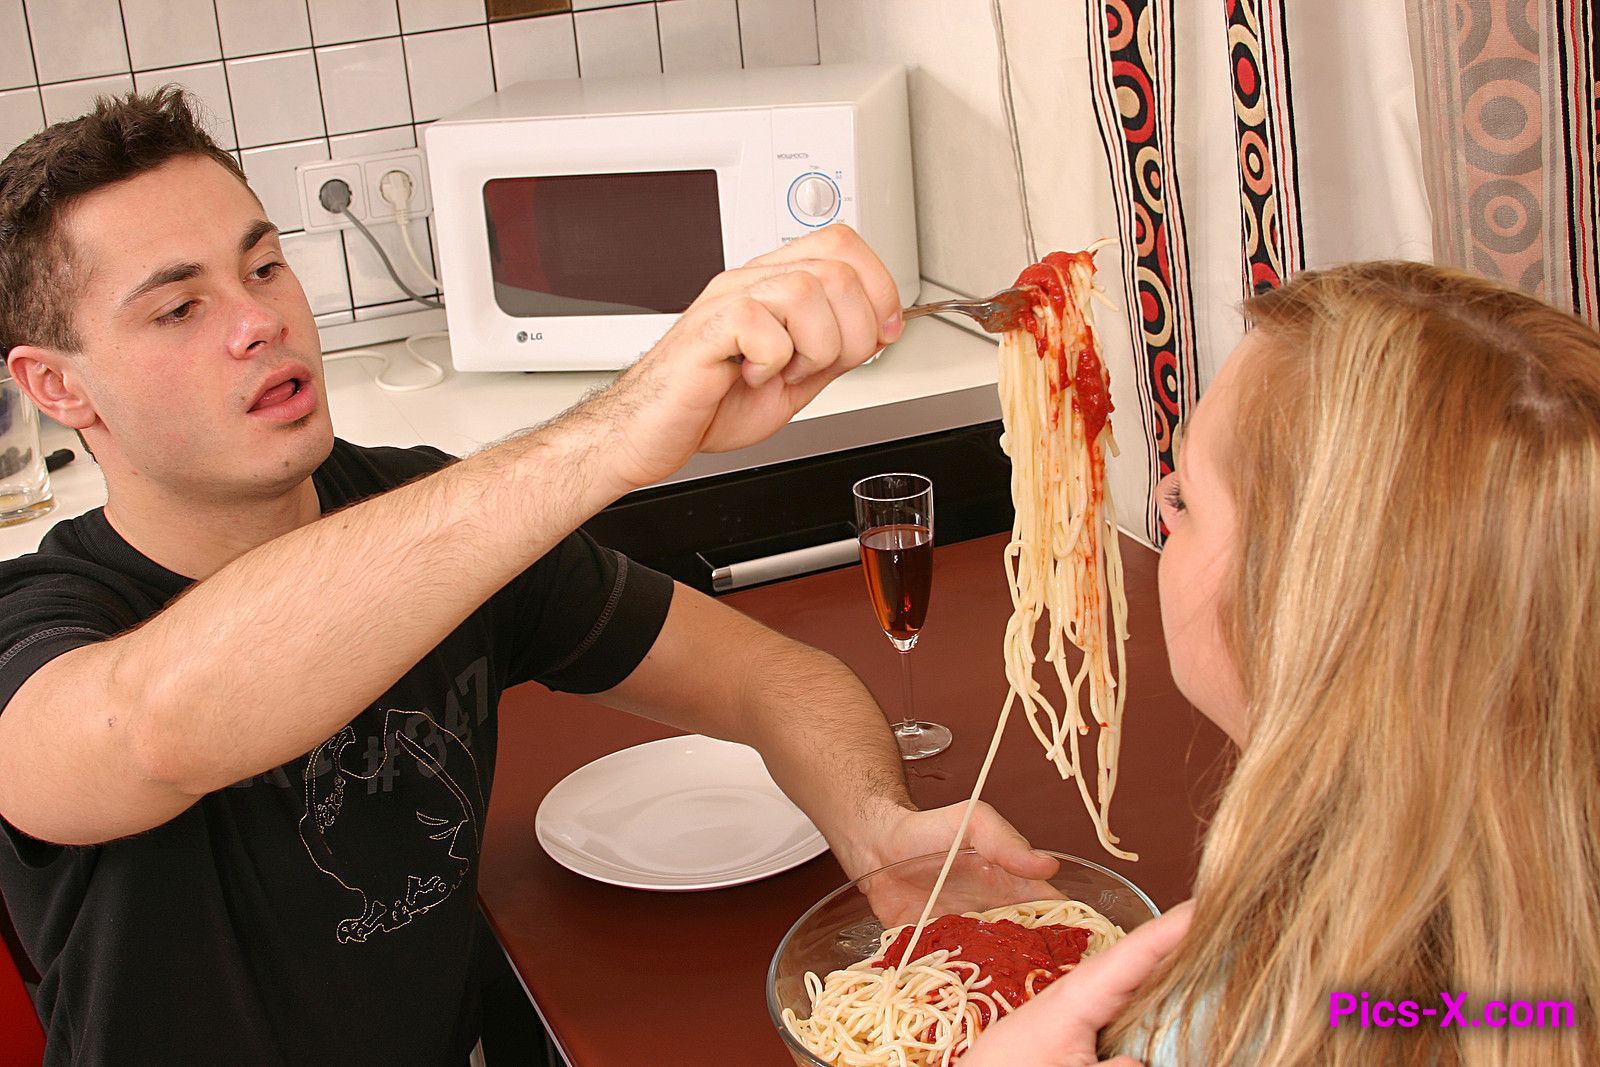 1600px x 1067px - Pasta Freak Patricia Uses Cock as Breadsticks! - Food Bangers | Pics-X